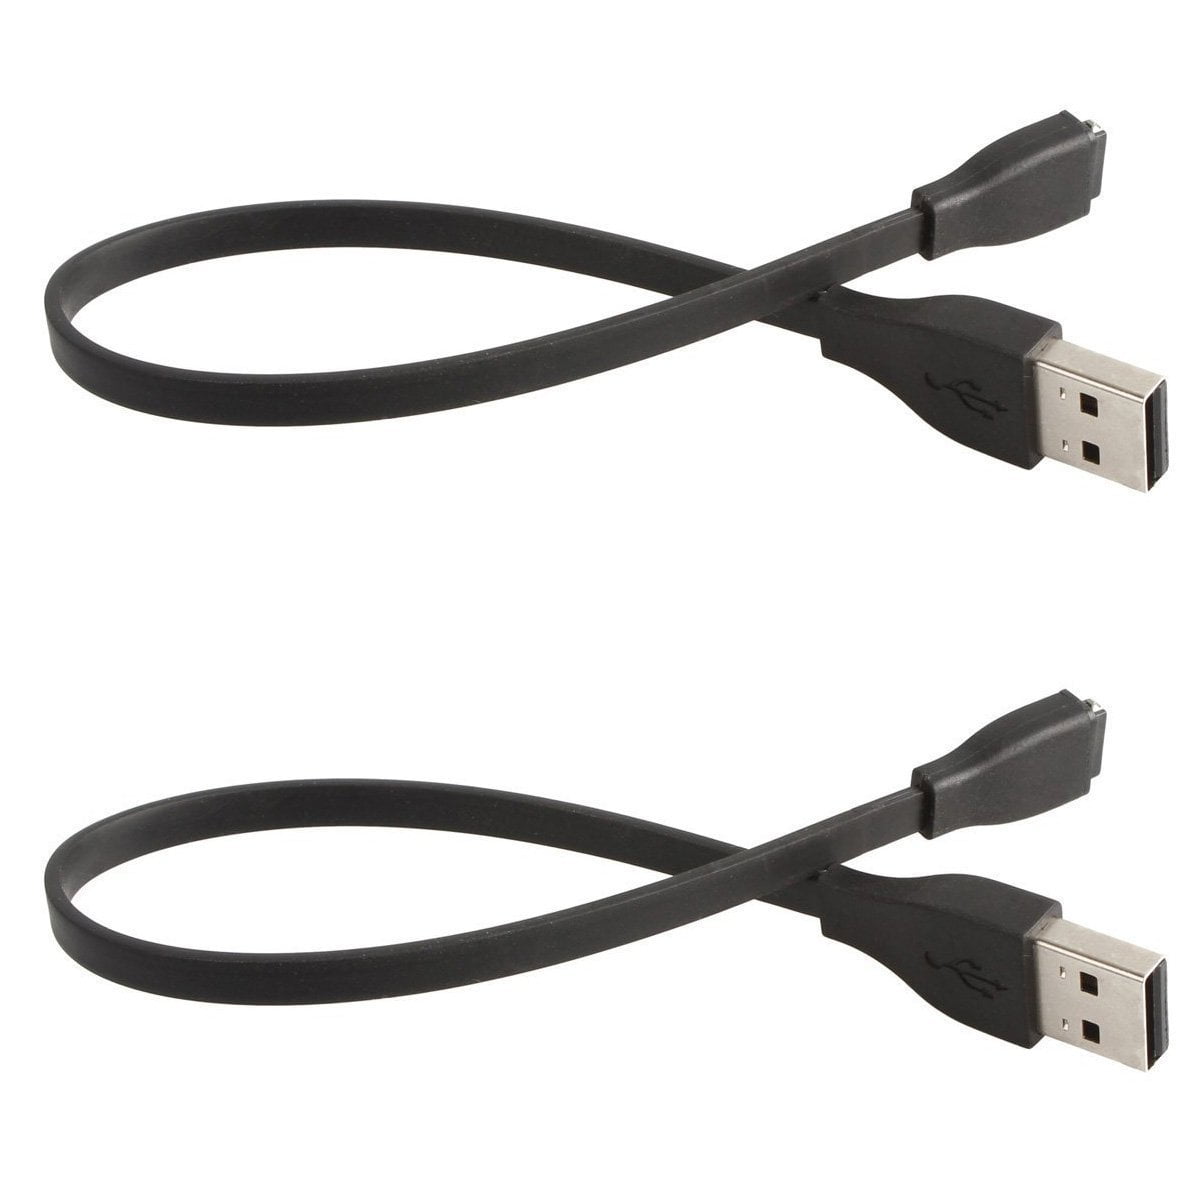 2 Pack USB Charging Charger Cable Cord for Fitbit Force Band Bracelet Wristband 